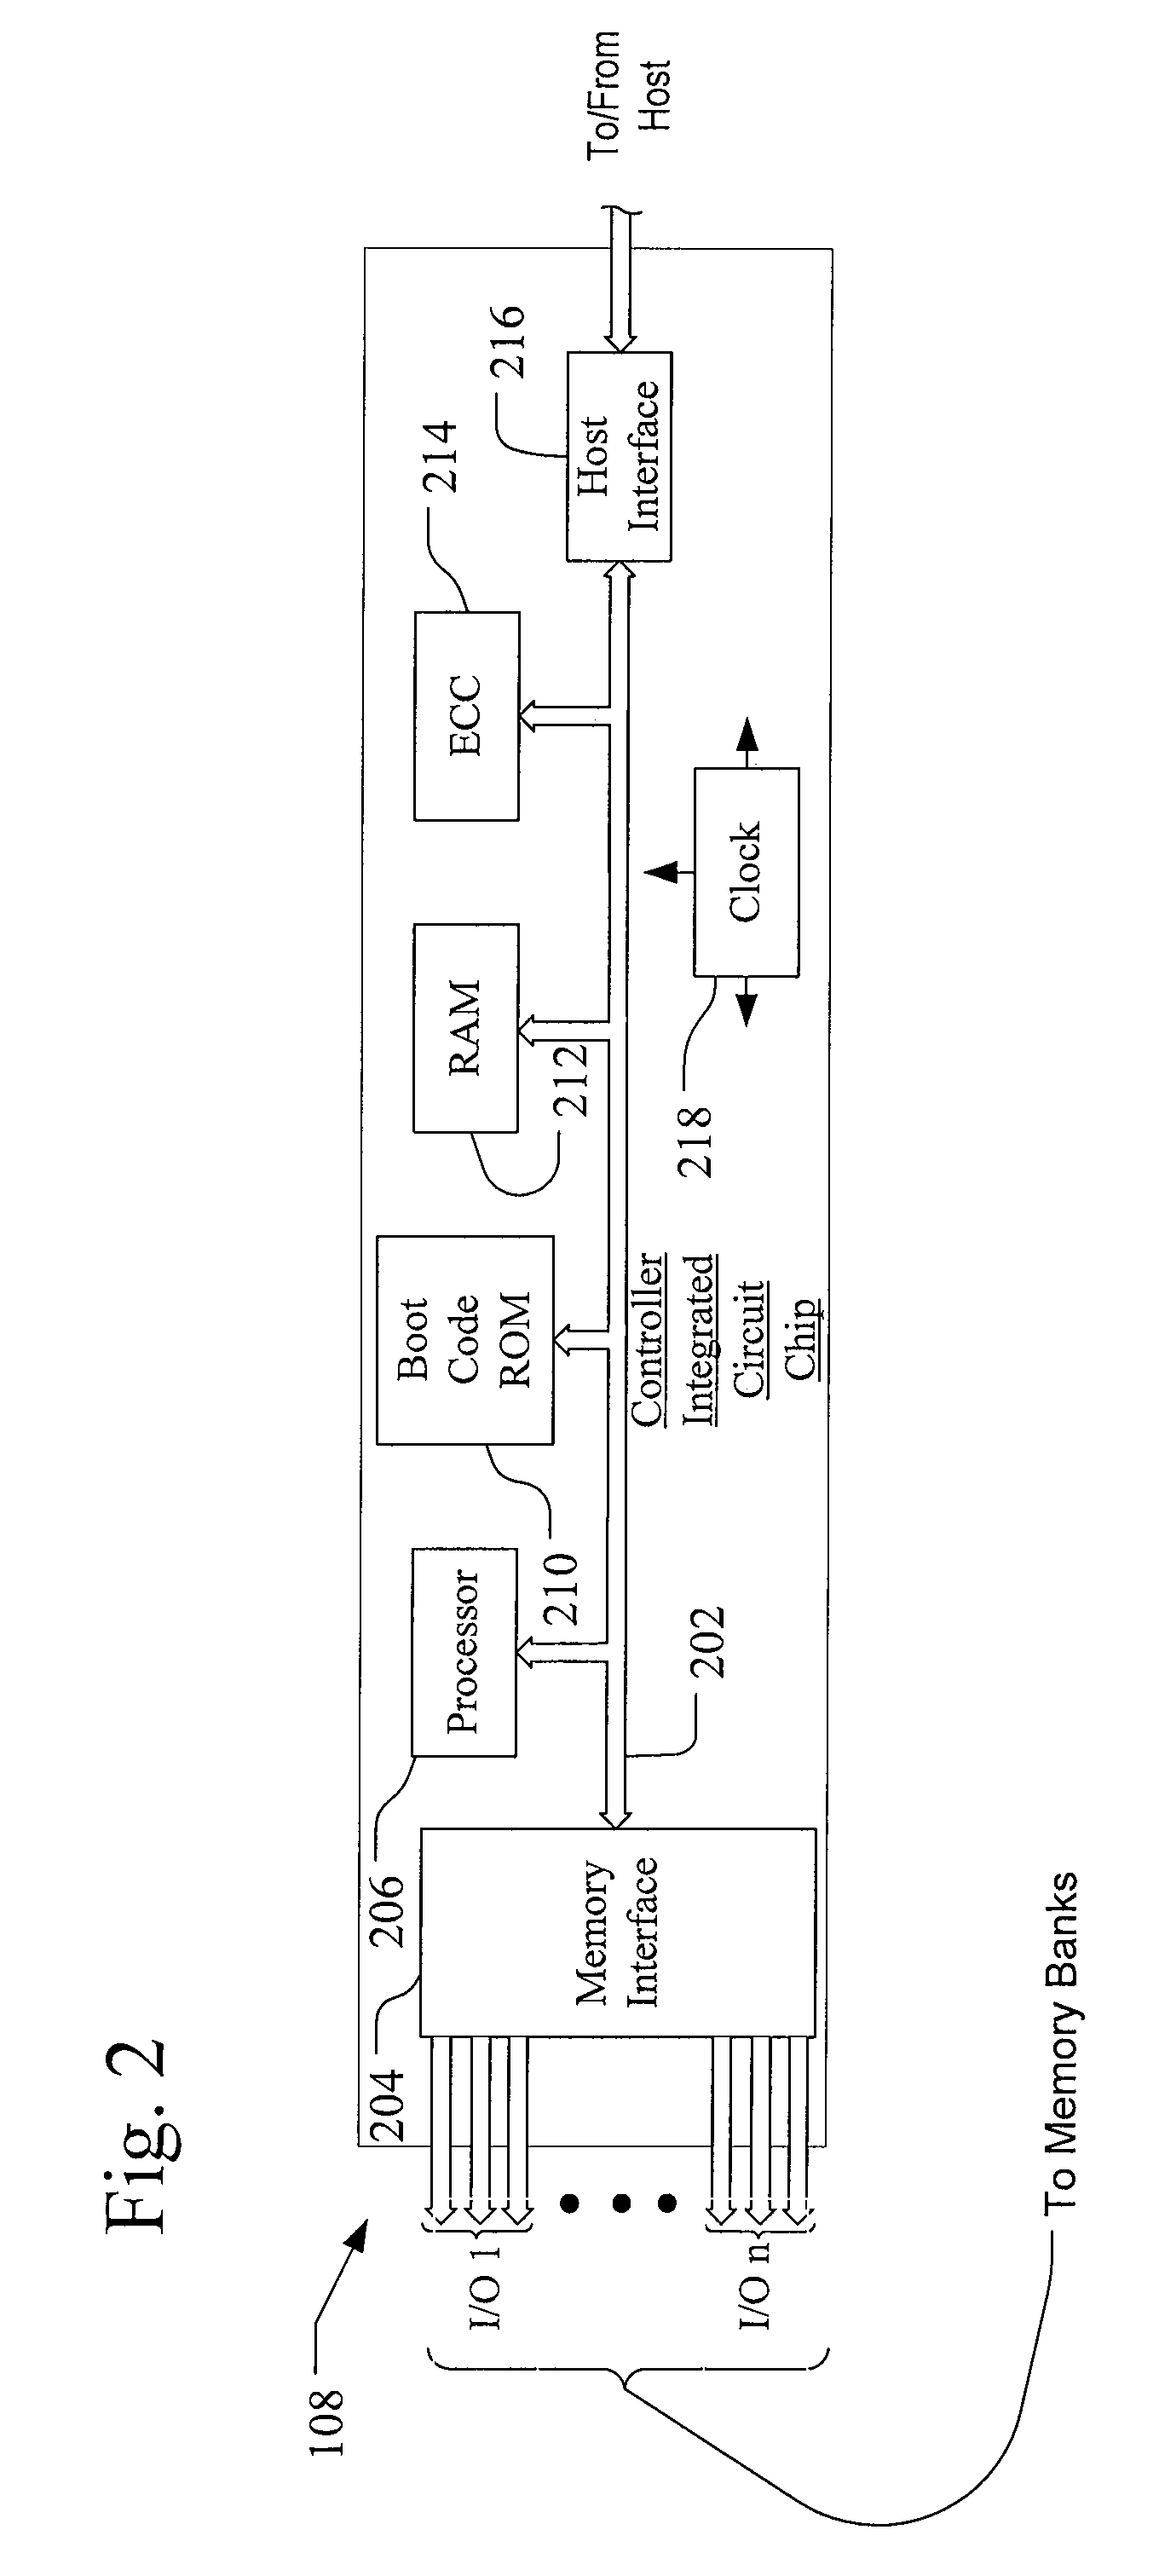 Method and system for storage address re-mapping for a multi-bank memory device